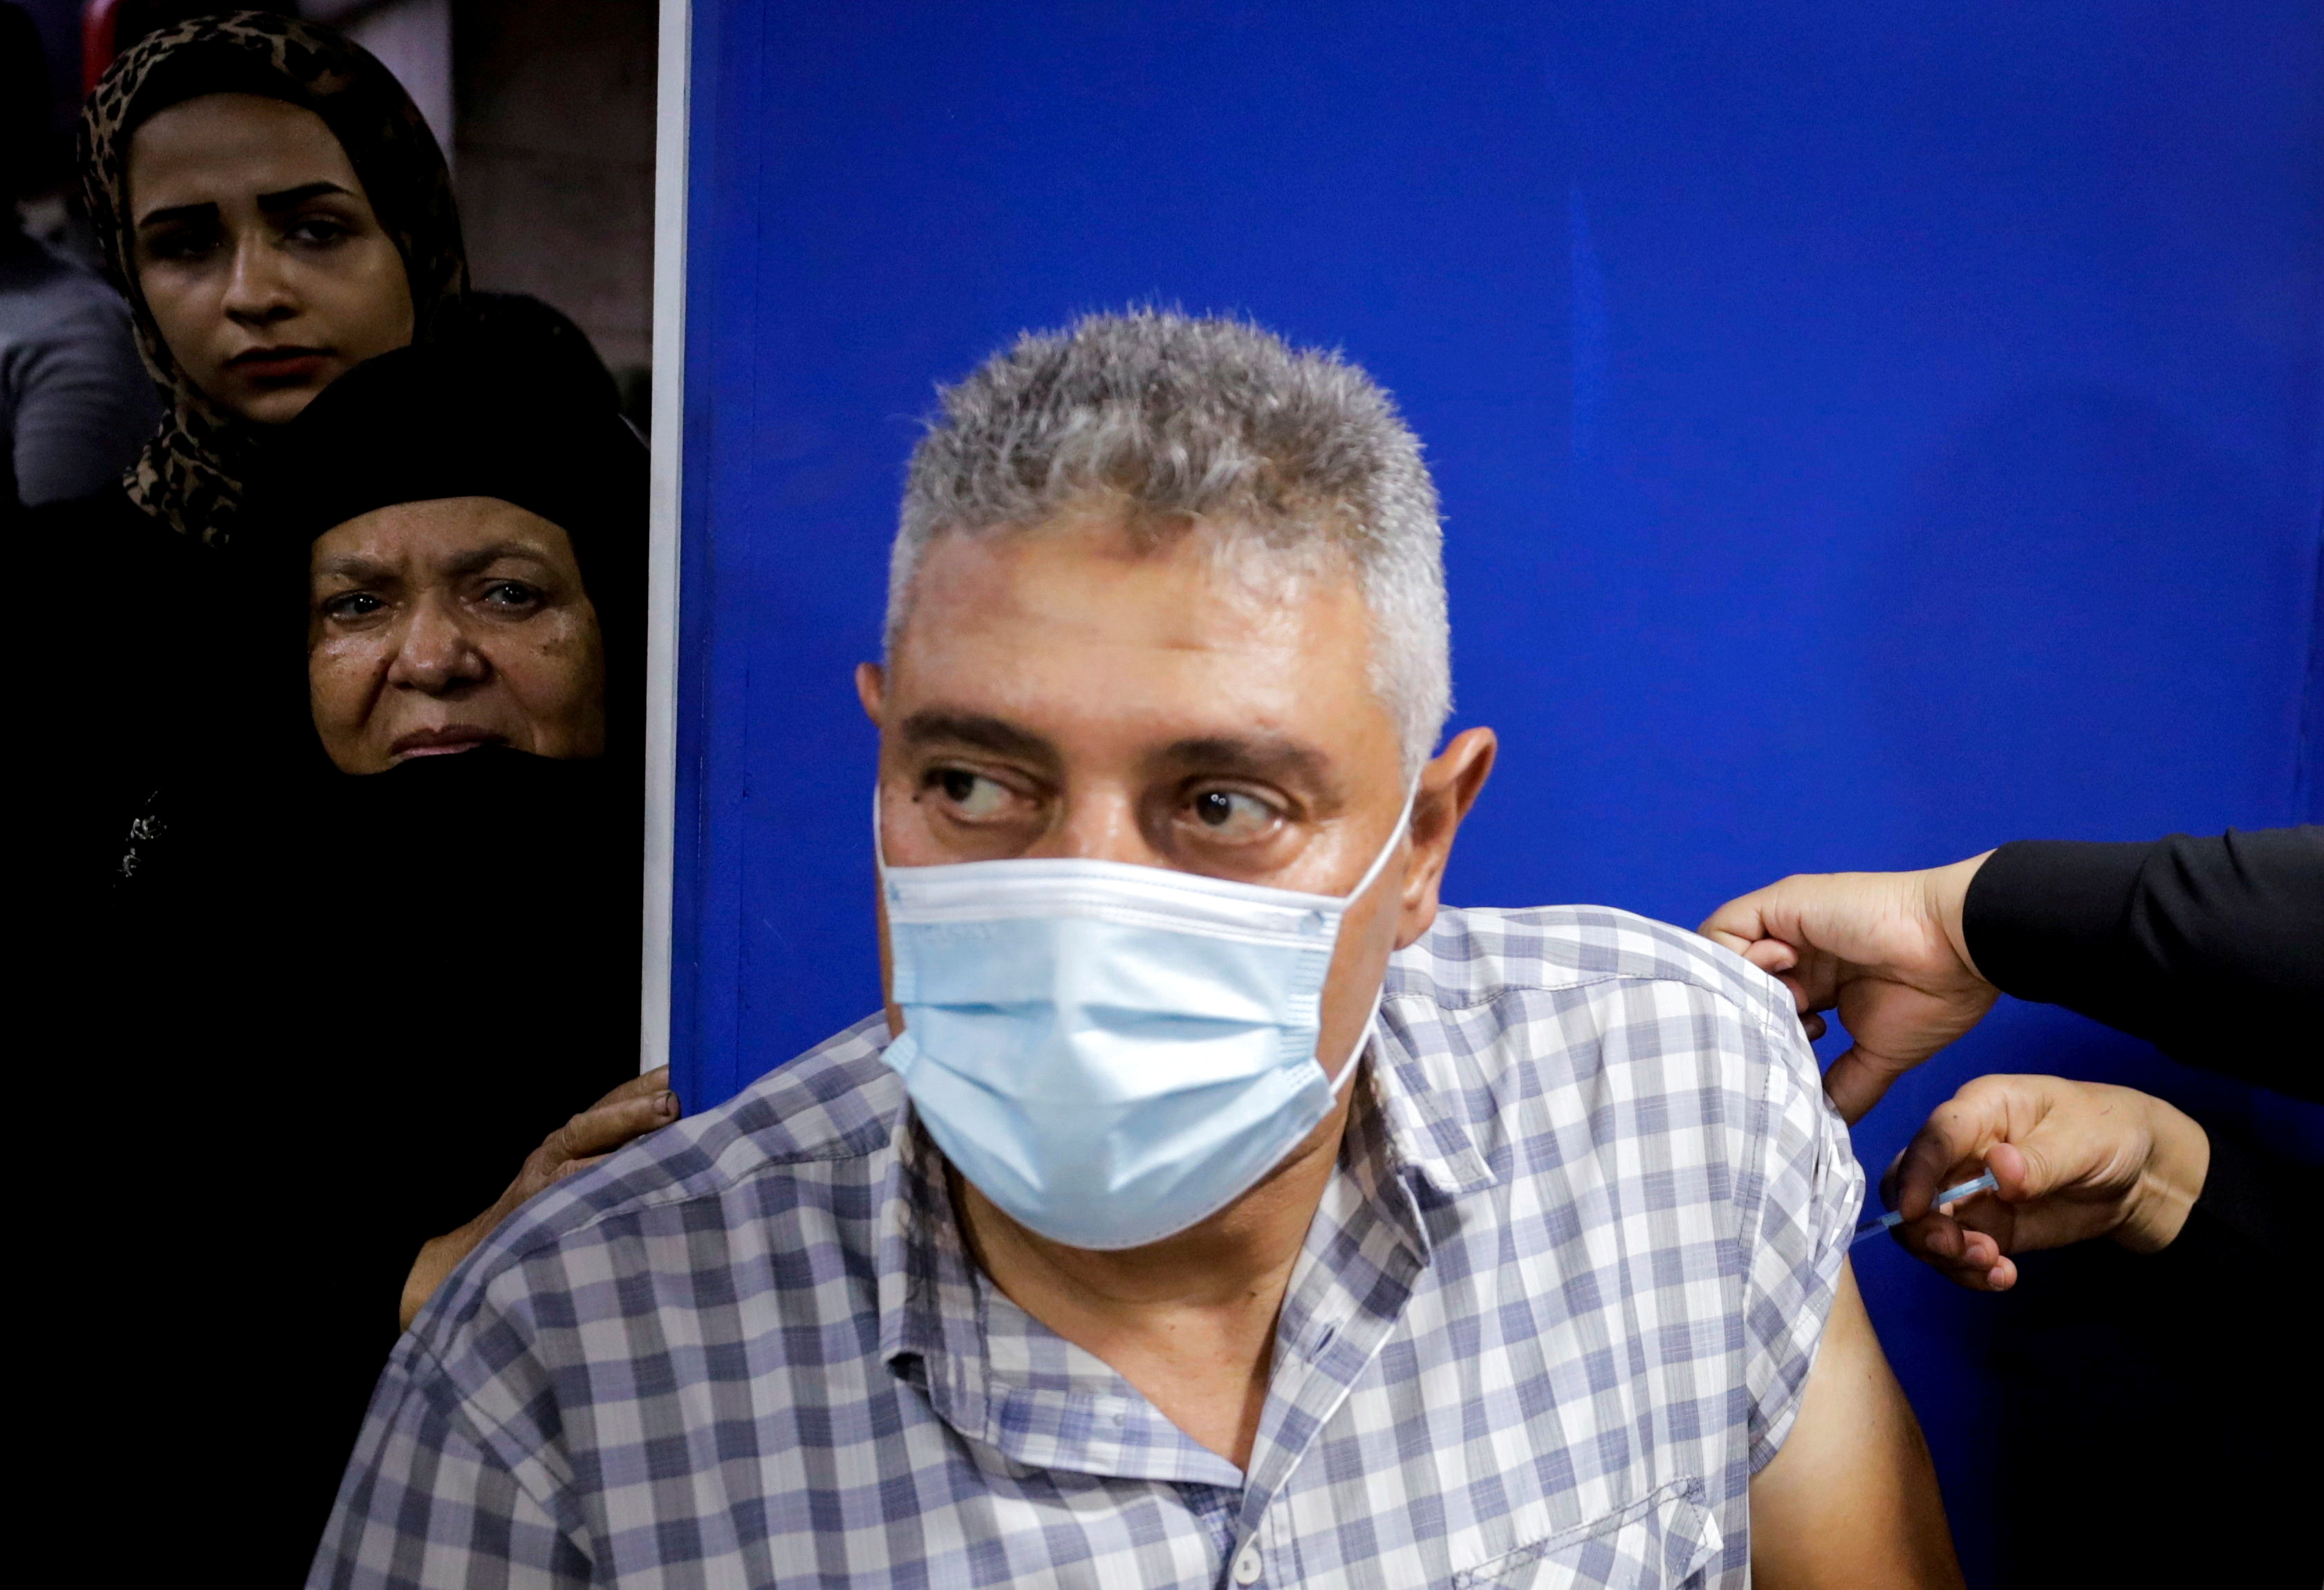 Man receives a dose of the COVID-19 vaccine, in Cairo